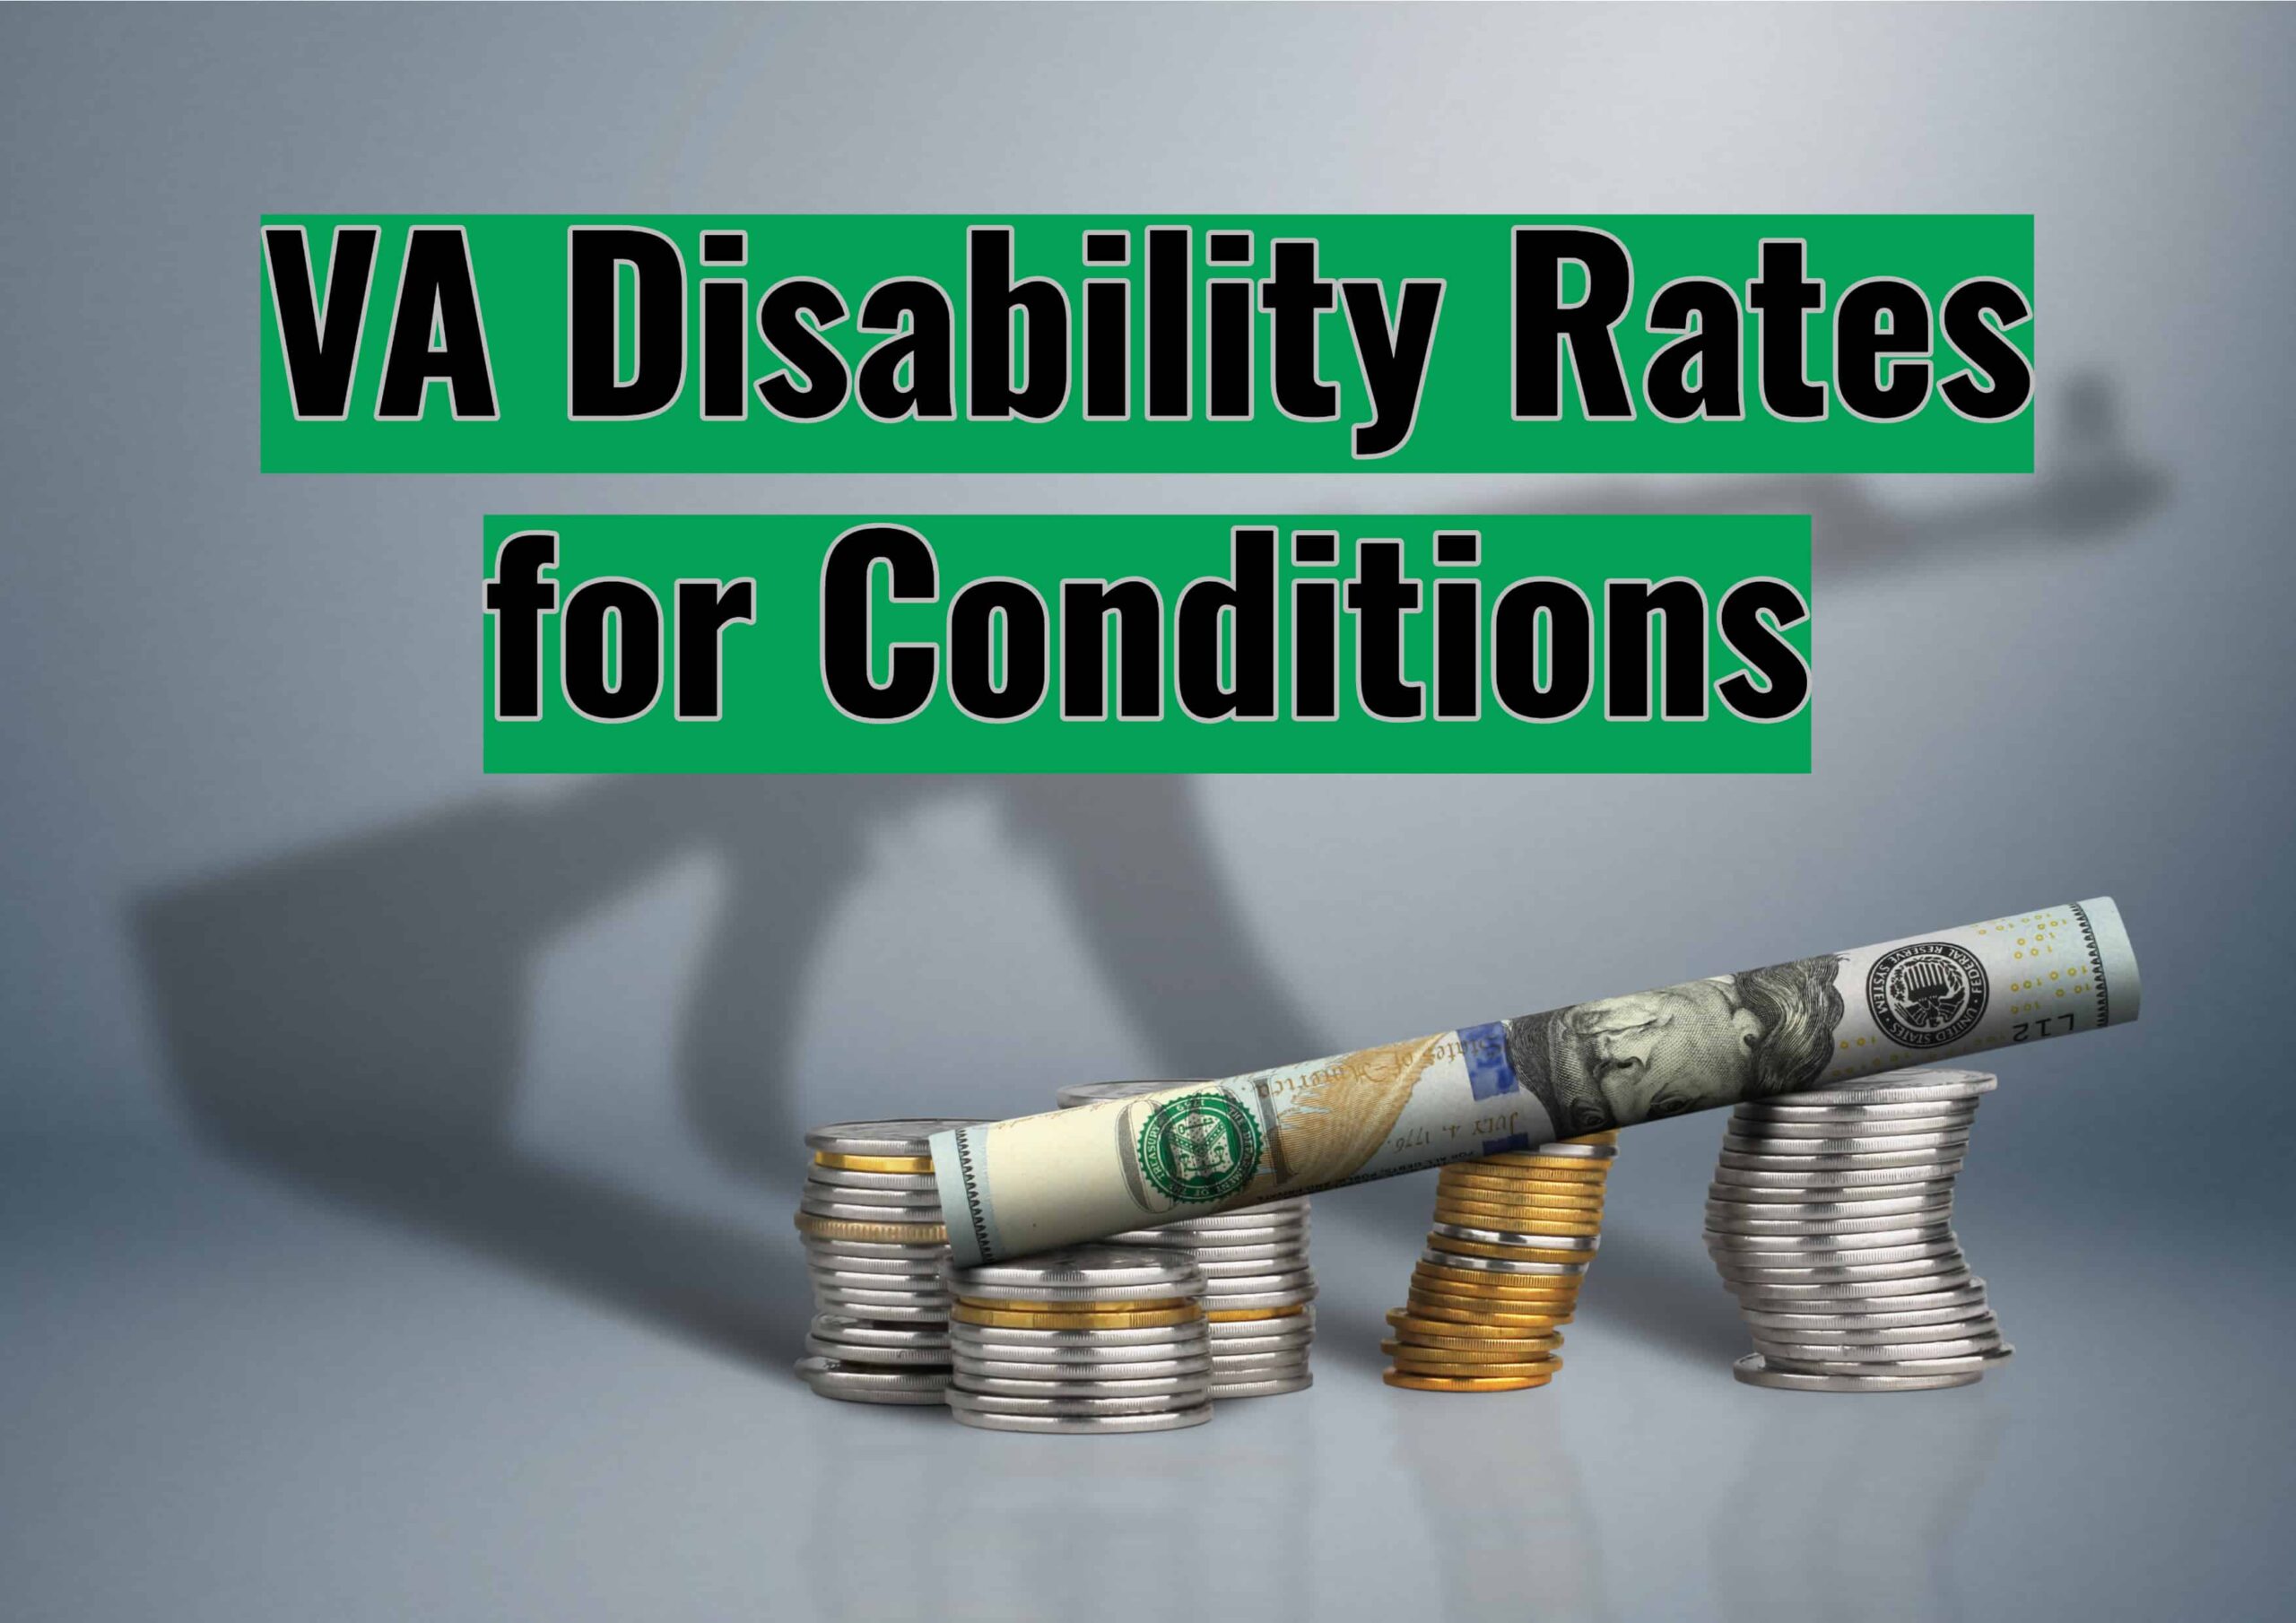 VA Disability Rates for Conditions